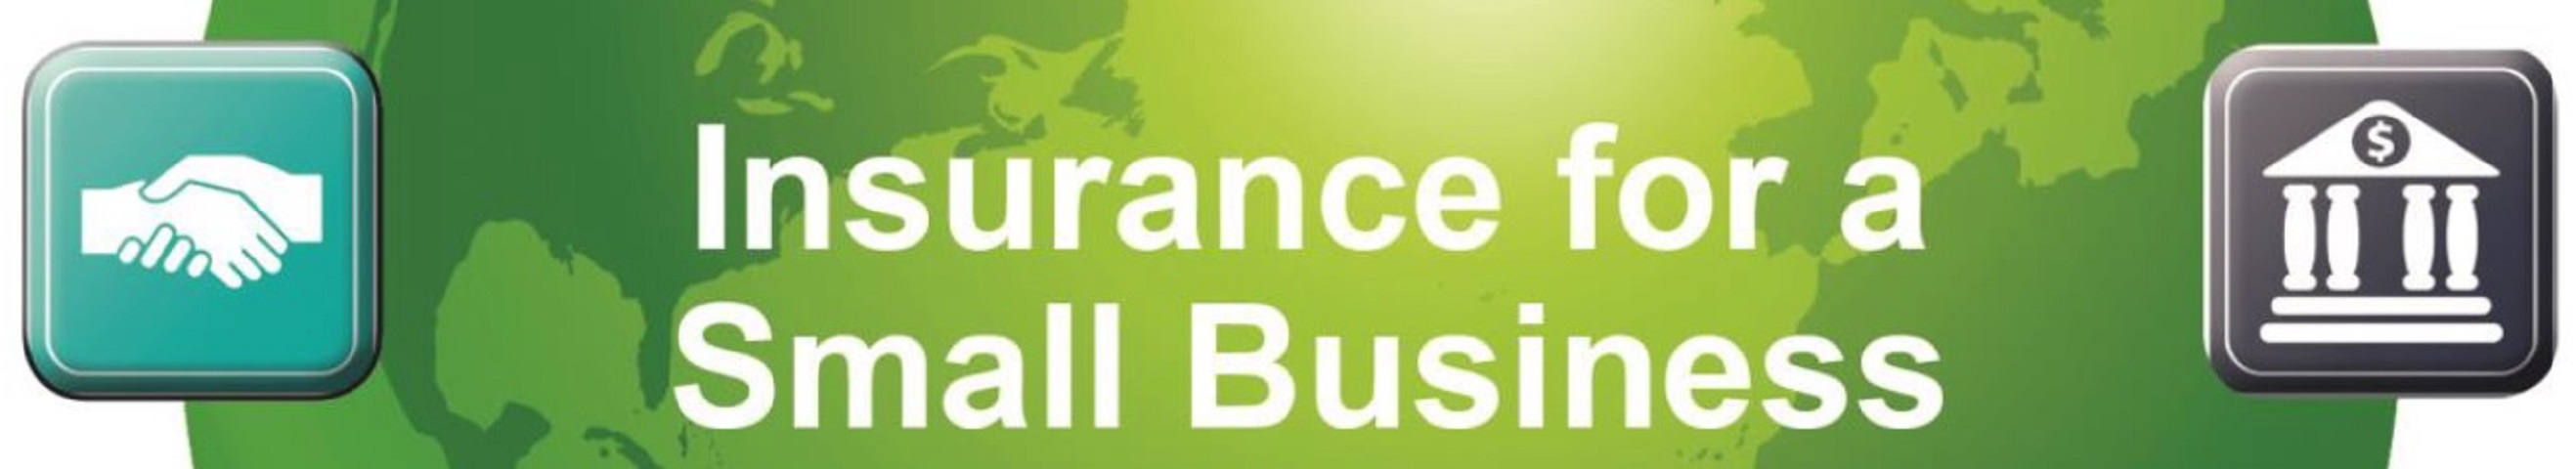 Starting a Small Business - Insurance Tips